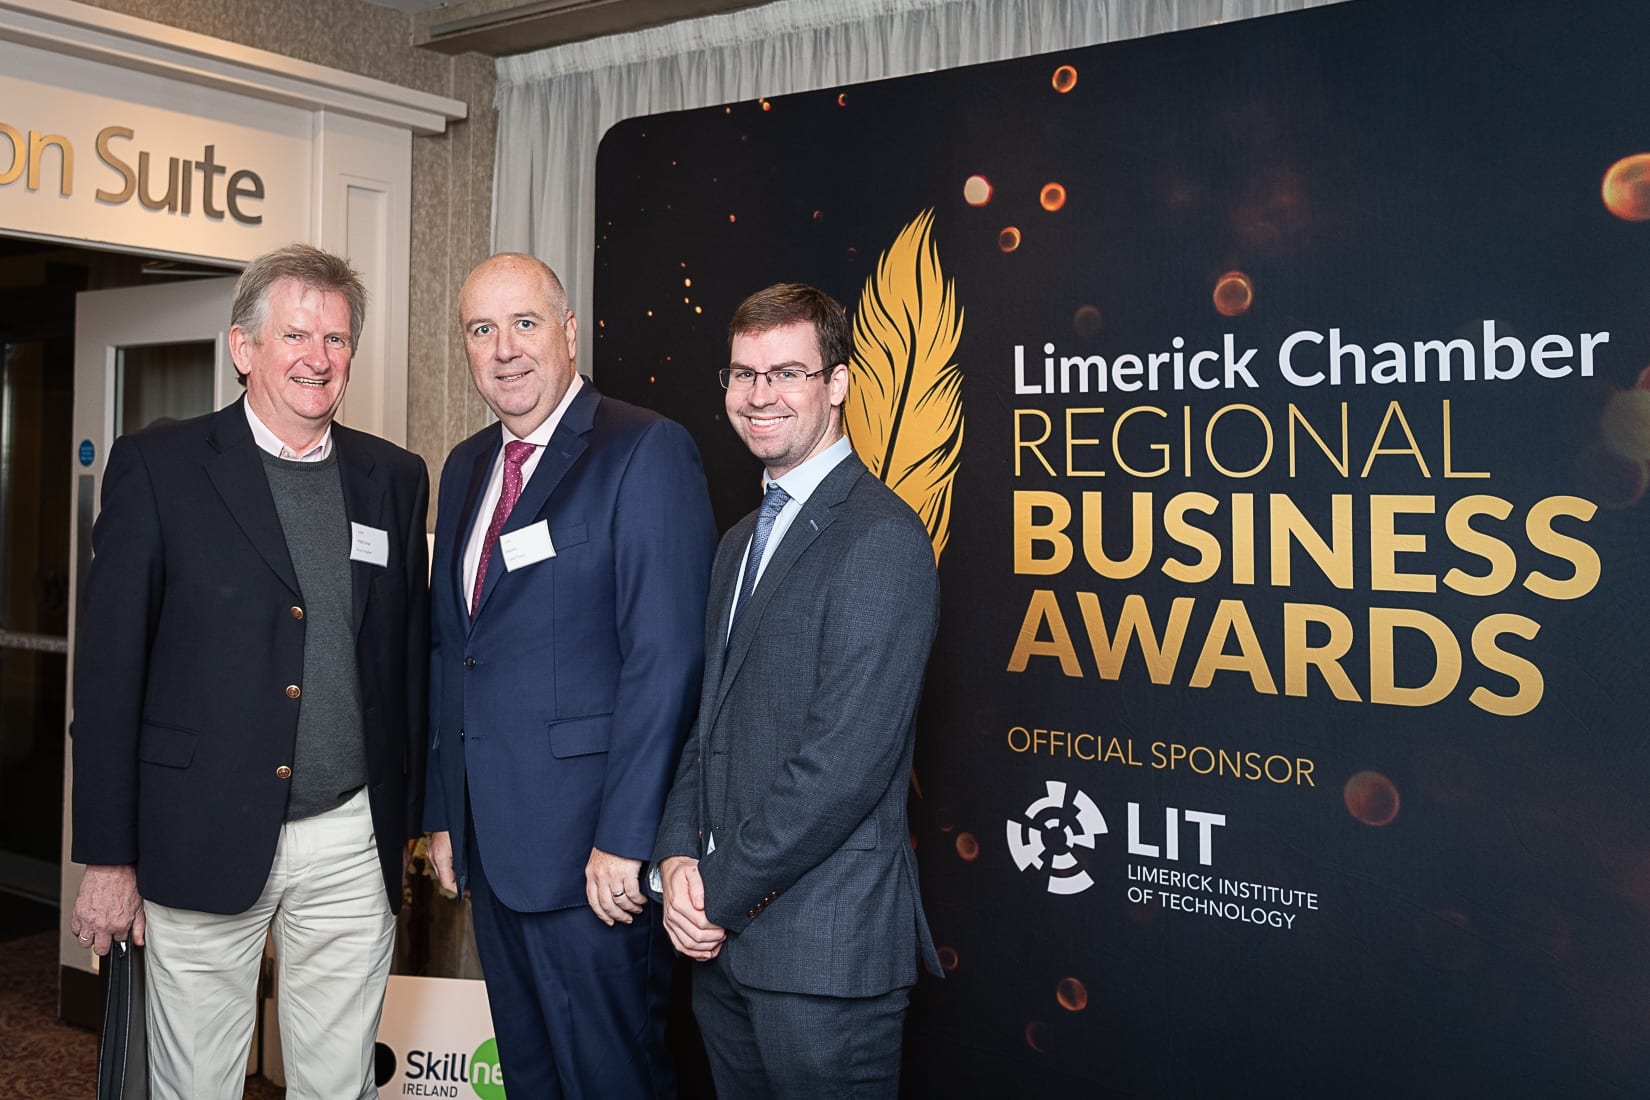 No repro fee-Limerick Chamber President Dinner Shortlist announcement which was held in The Limerick Strand Hotel on Wednesday 16th October  - From Left to Right: Kevin Vaughan - VRM Social, Cahill Treacy - Deloitte, Colm Hogan - Deloitte. 
Photo credit Shauna Kennedy